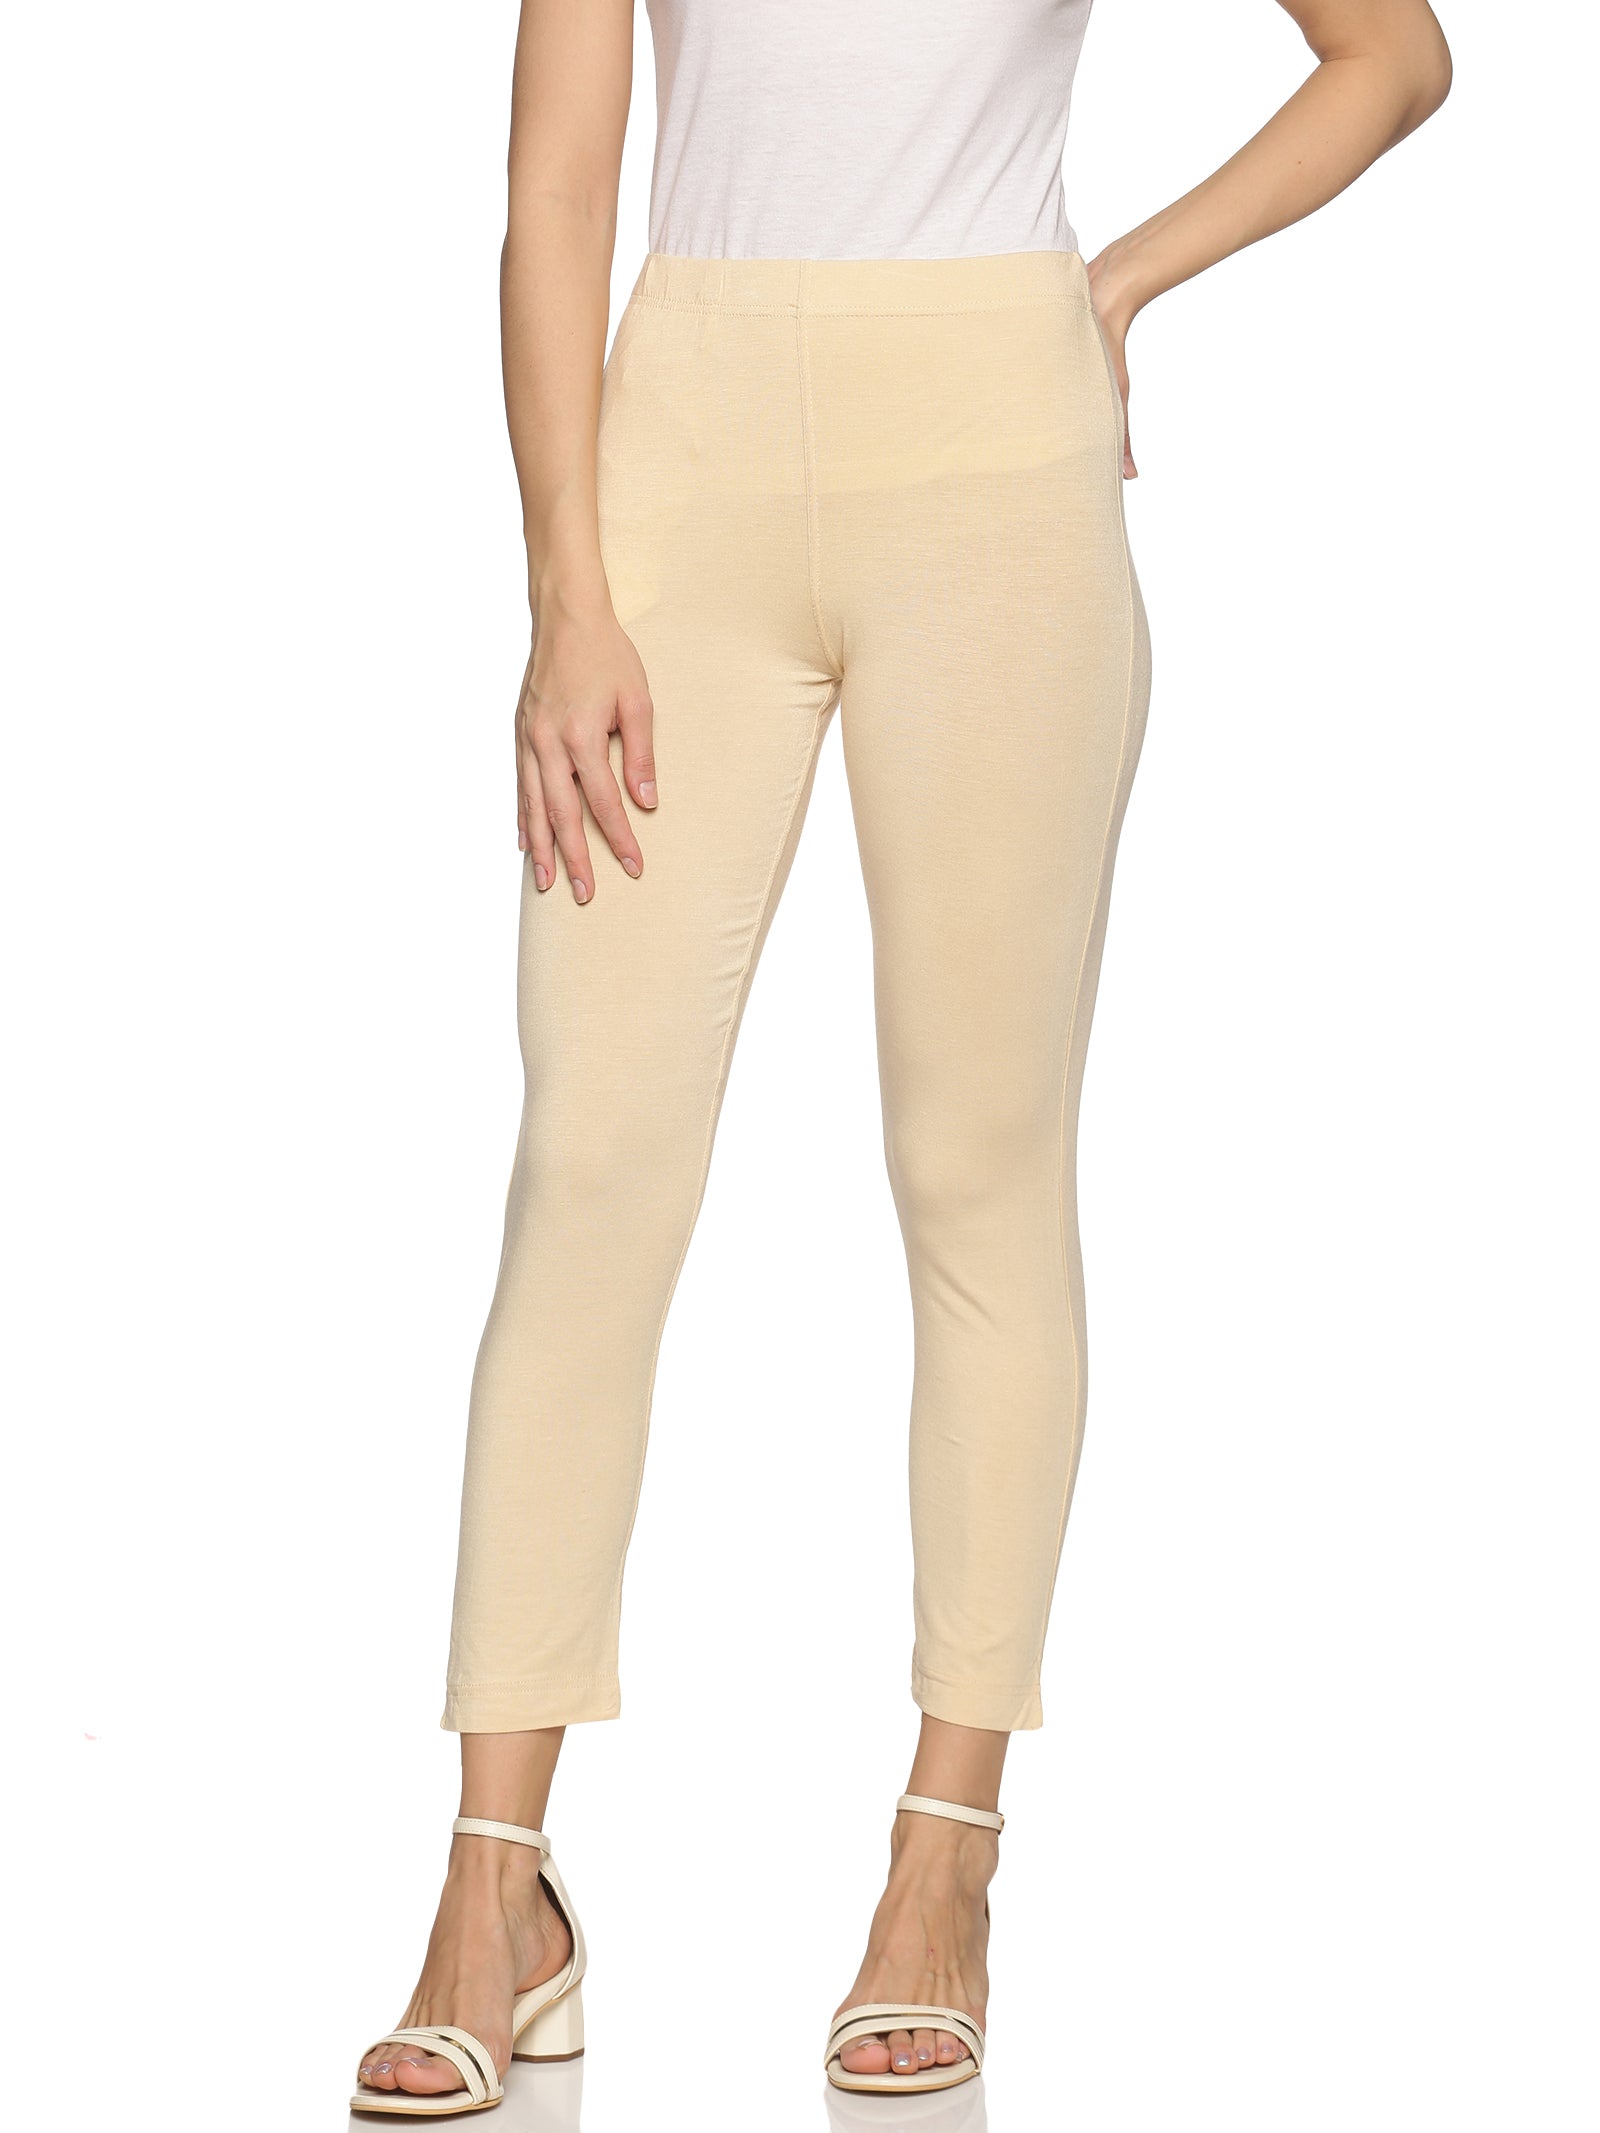 Buy DIGITAL SHOPEE Cotton Women Trouser Pant Use for Formal Office High  Waist for Wide Leg Ankle Length Straight Pencil Pant (Beige_Medium) at  Amazon.in